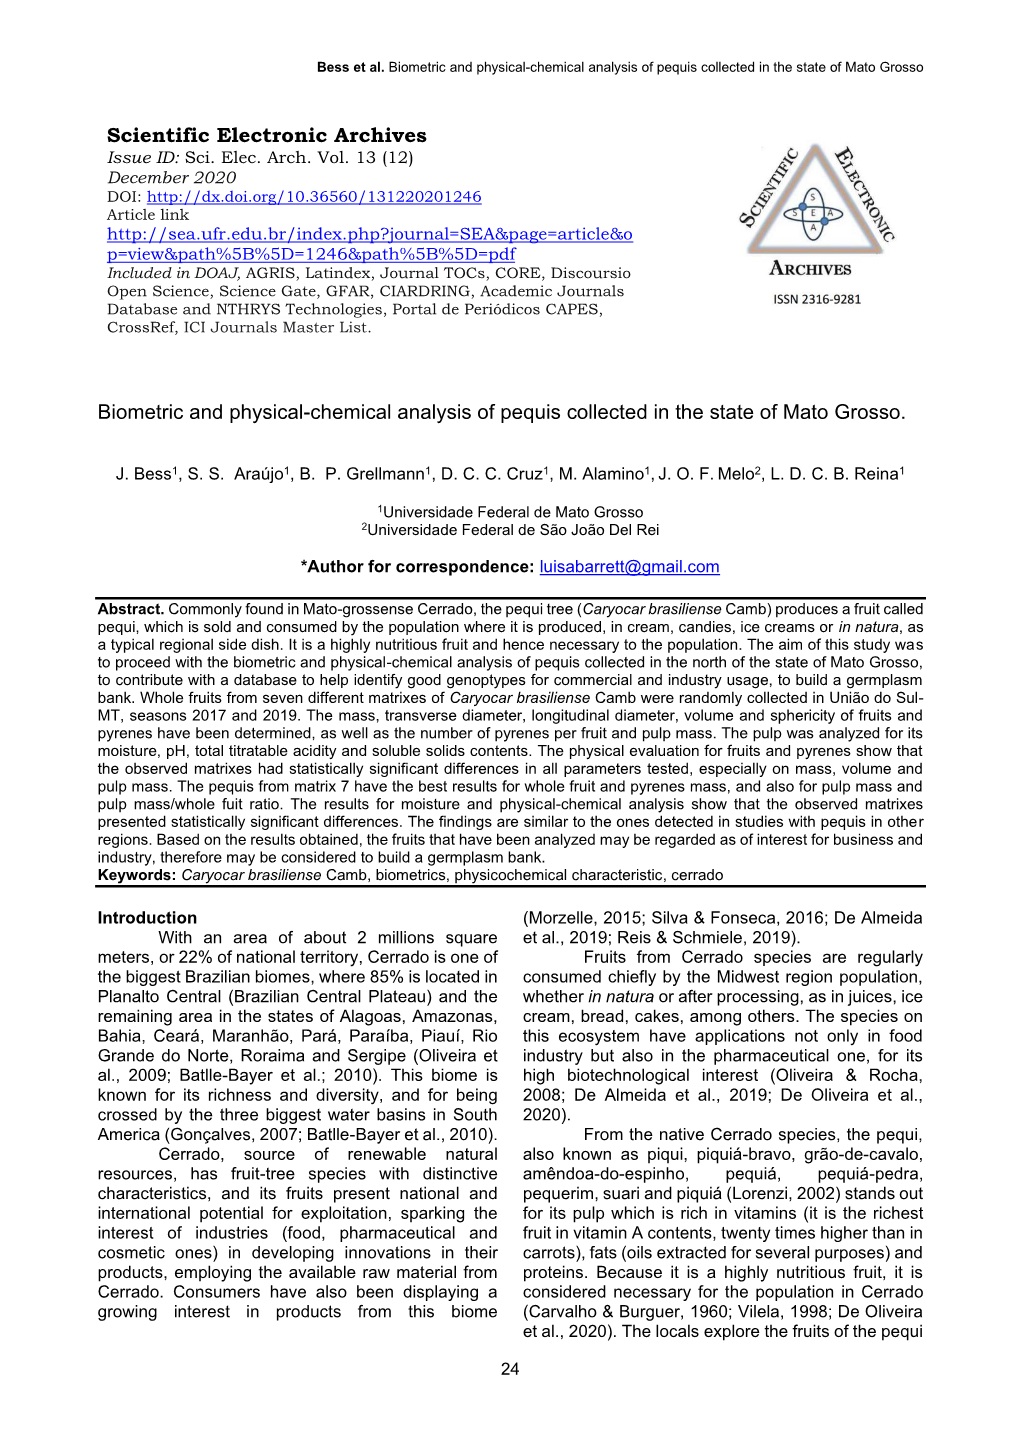 Scientific Electronic Archives Biometric and Physical-Chemical Analysis of Pequis Collected in the State of Mato Grosso